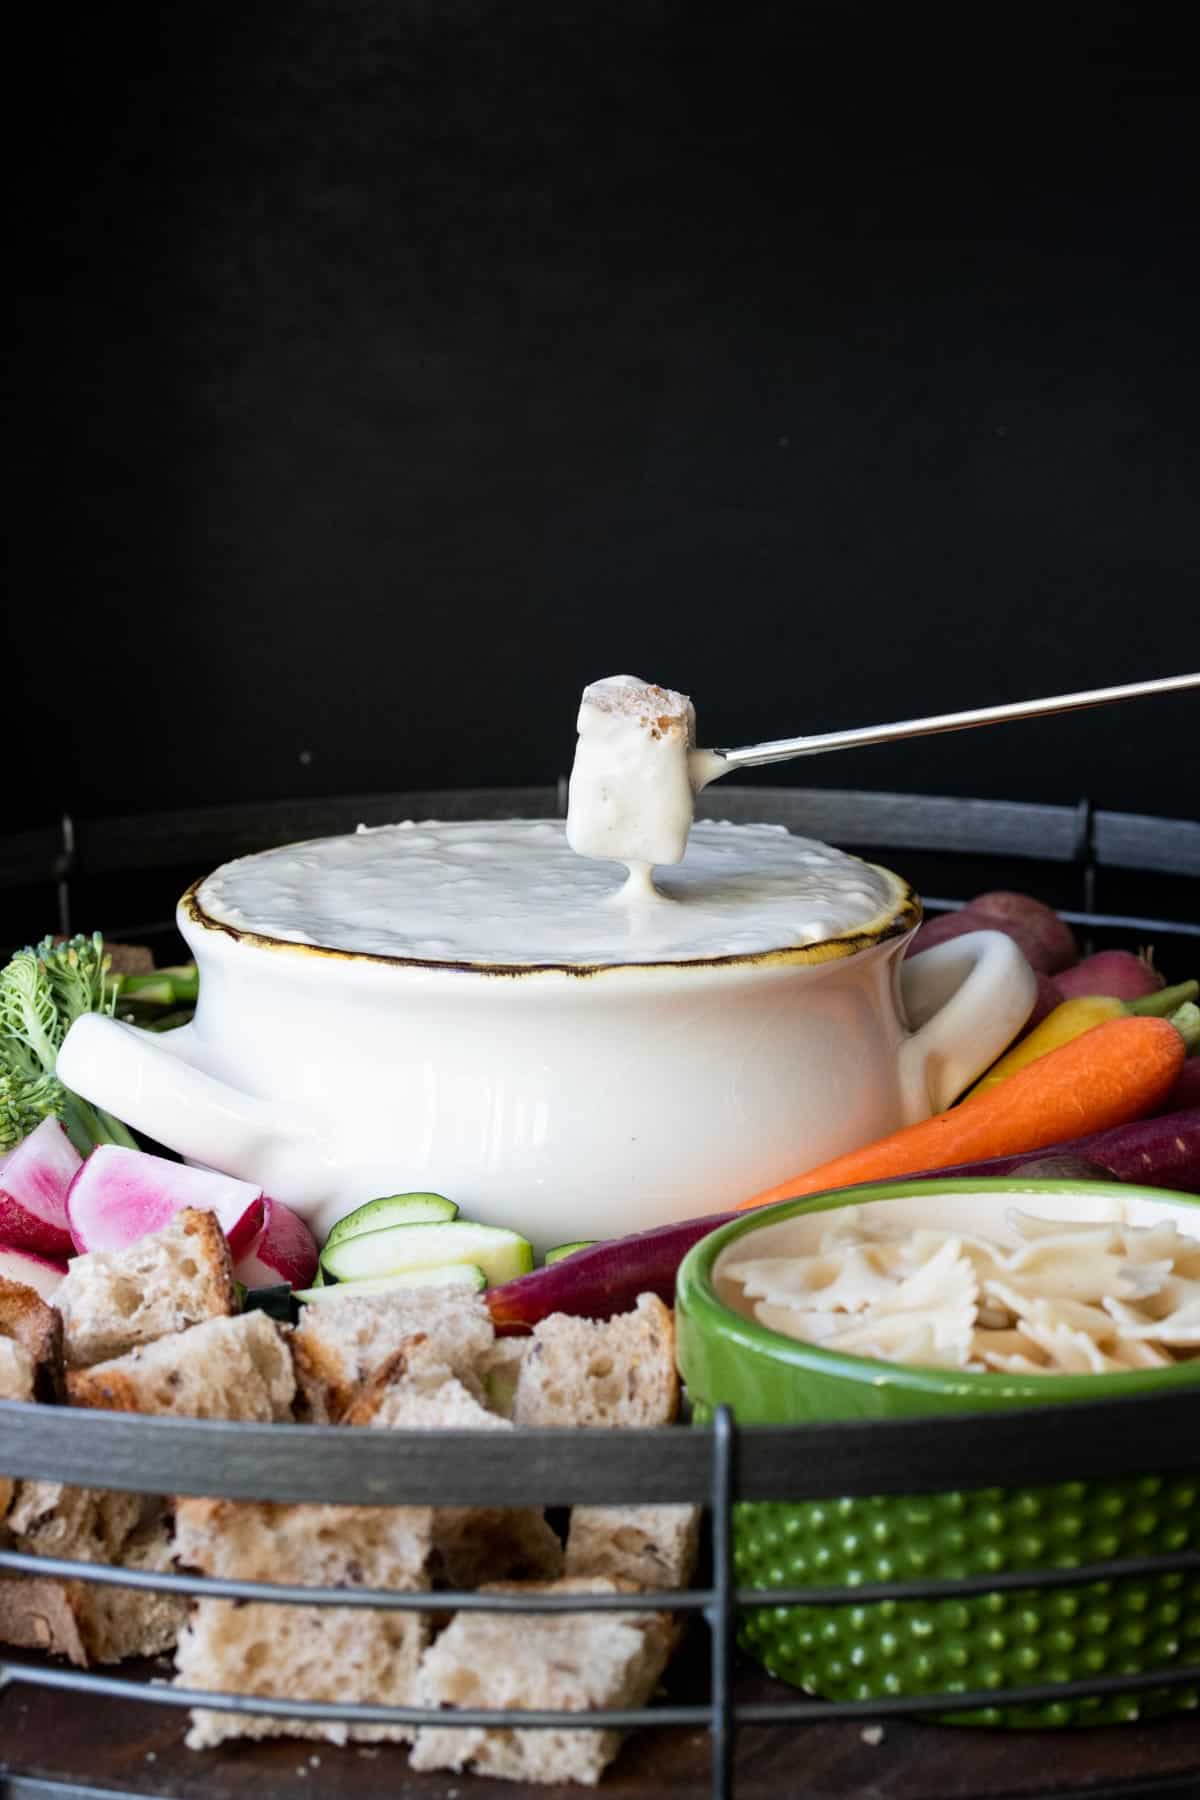 Piece of bread being dipped into a bowl of cheese fondue surrounded by veggies